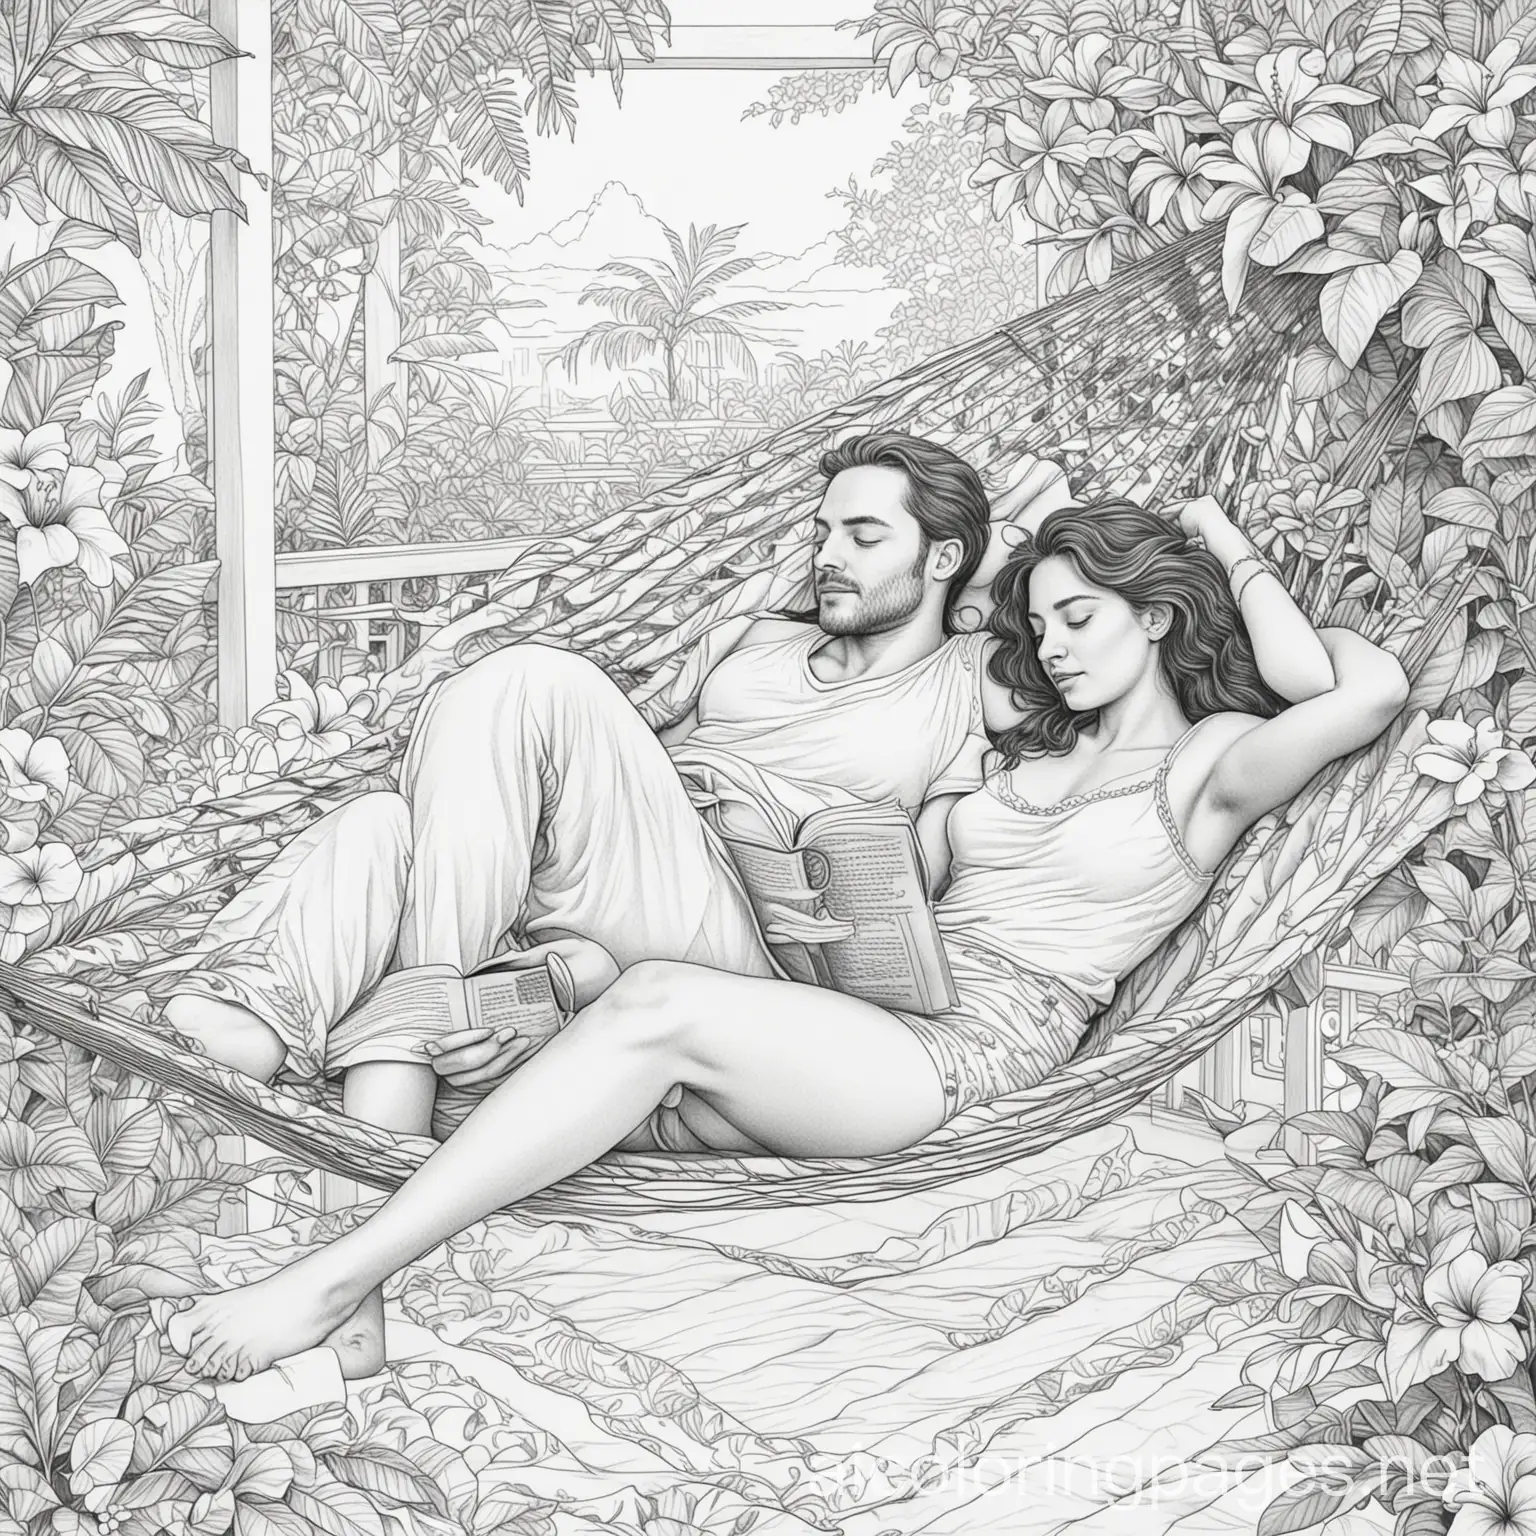 a coloring page of a woman relaxing and reading a book while laying down in a hammock with her handsome husband in their balcony full of plants and plumeria and hibiscus flowers, Coloring Page, black and white, line art, white background, Simplicity, Ample White Space. The background of the coloring page is plain white to make it easy for young children to color within the lines. The outlines of all the subjects are easy to distinguish, making it simple for kids to color without too much difficulty